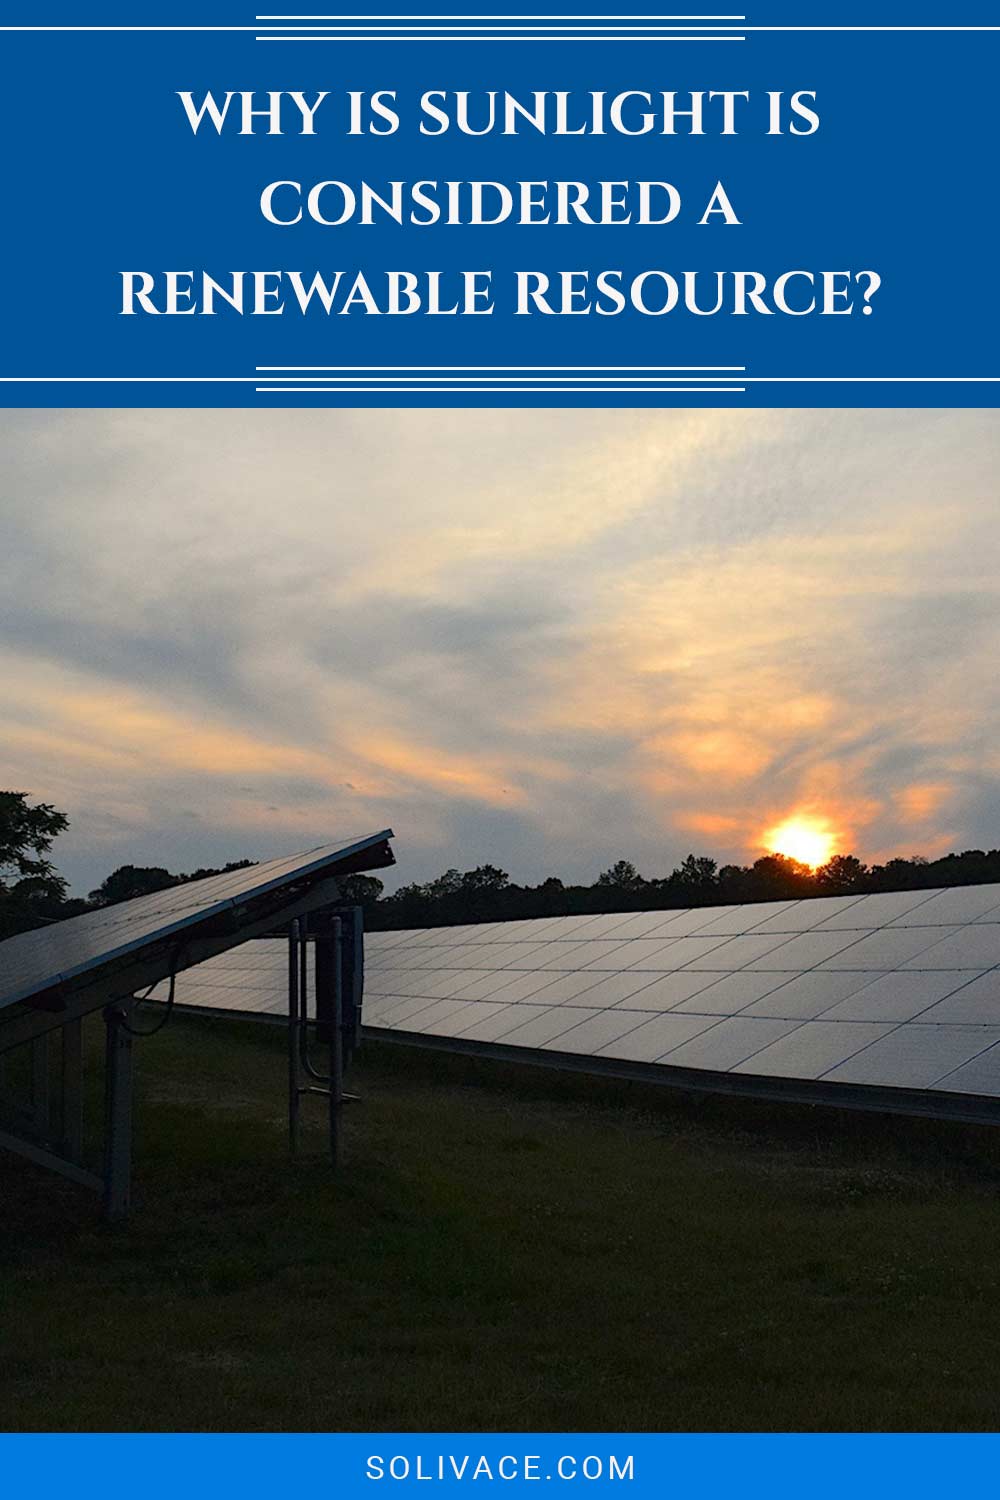 Why Is Sunlight Is Considered A Renewable Resource?